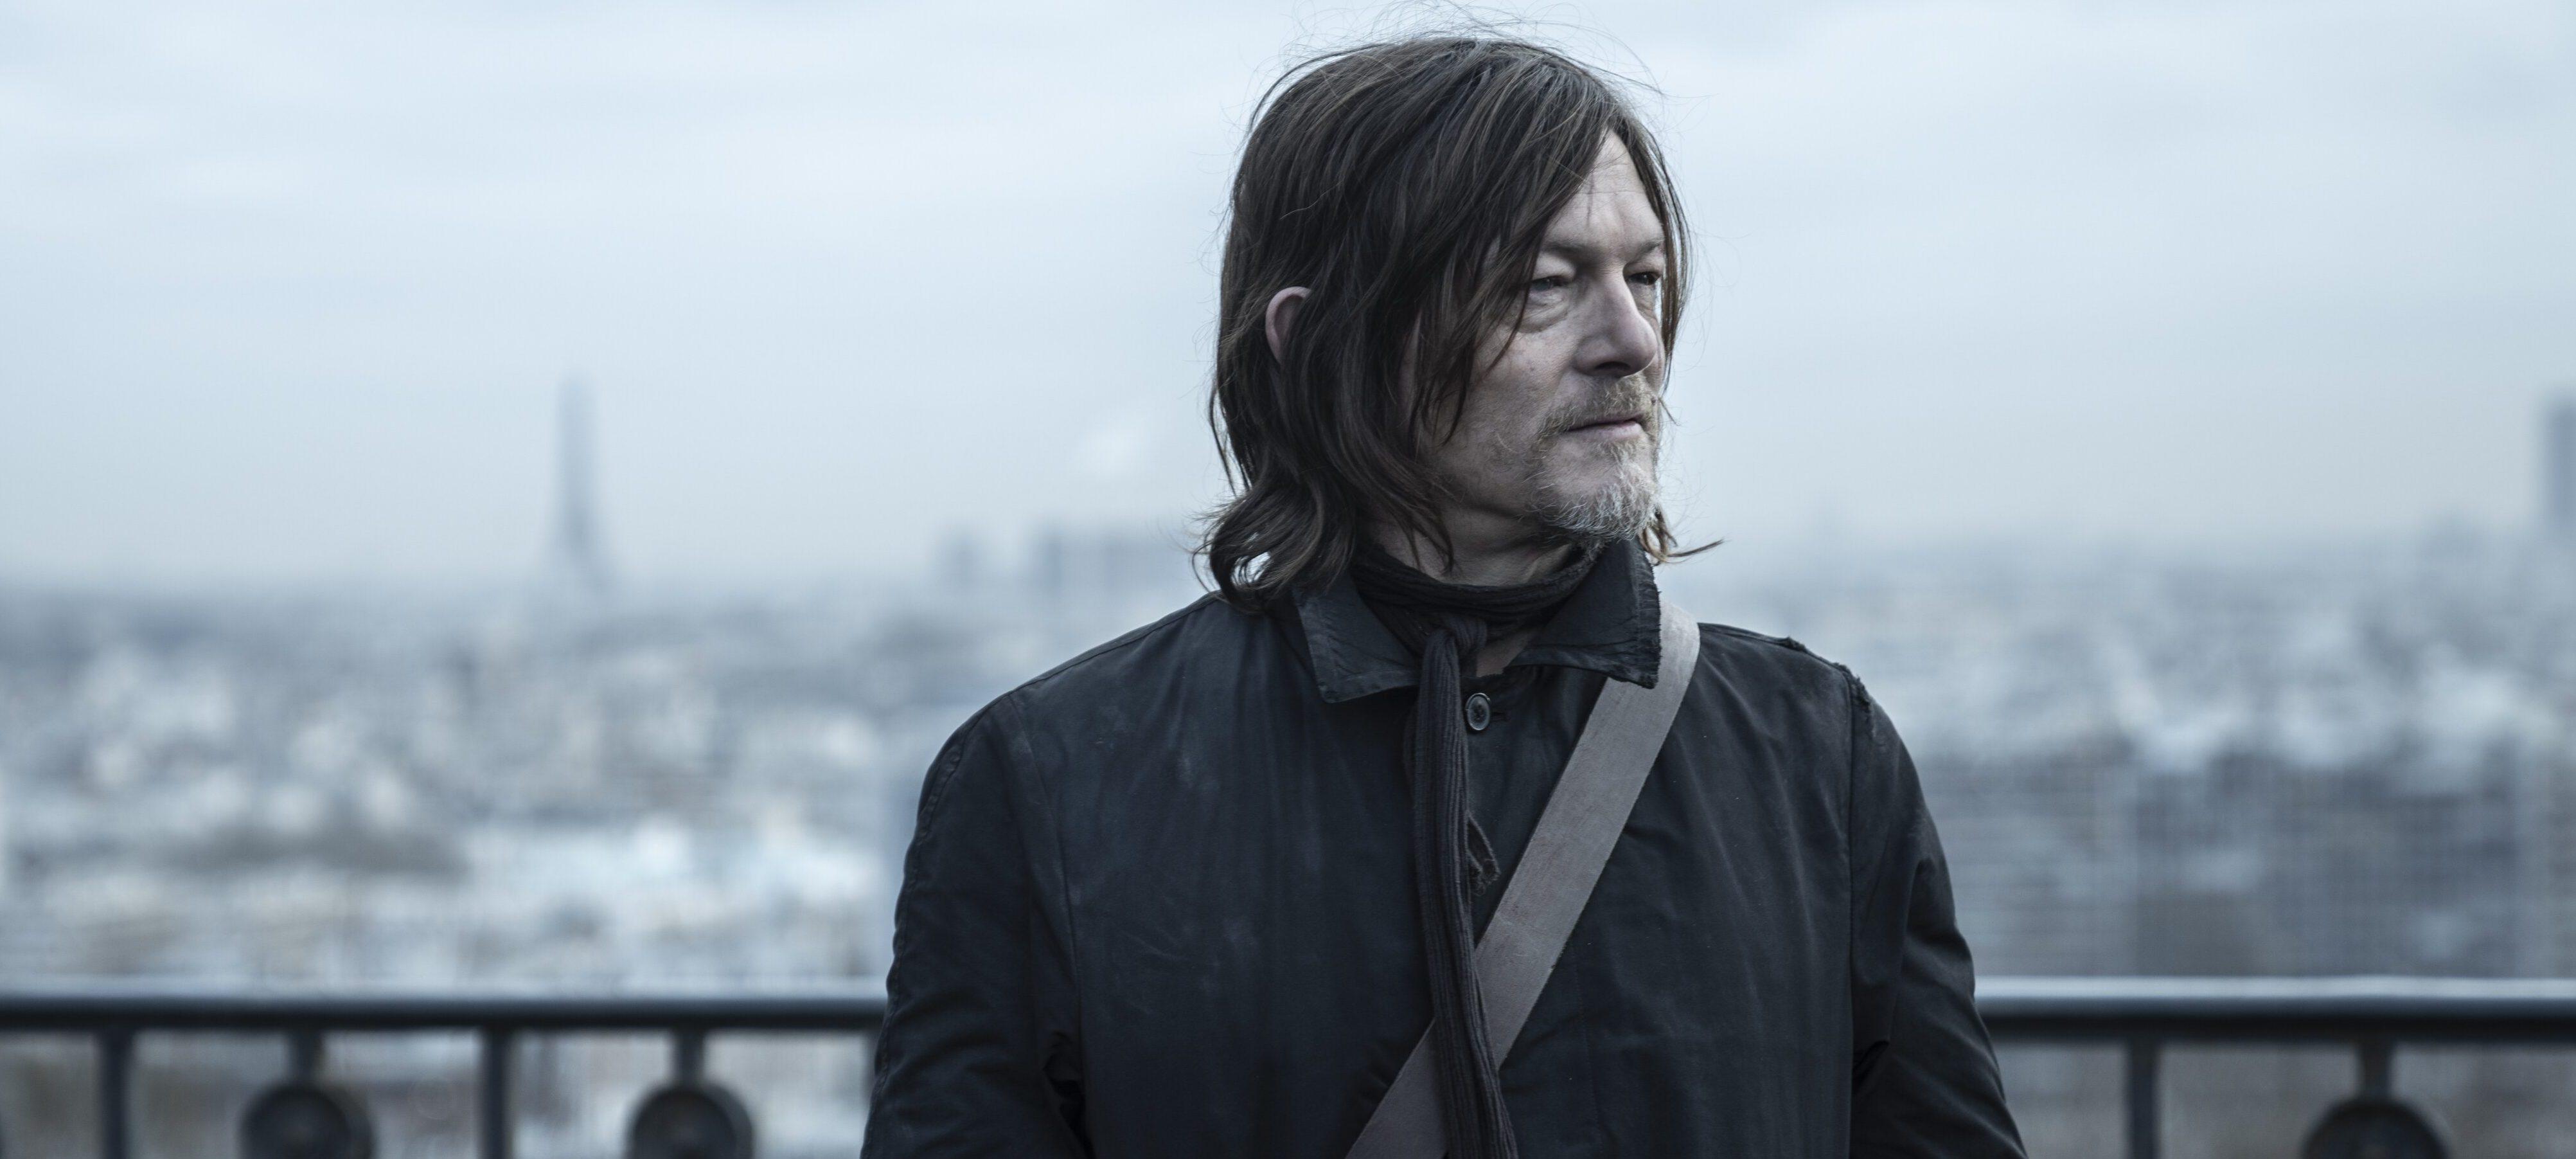 The Walking Dead Daryl Dixon Episode 3 Recap and Ending, Explained